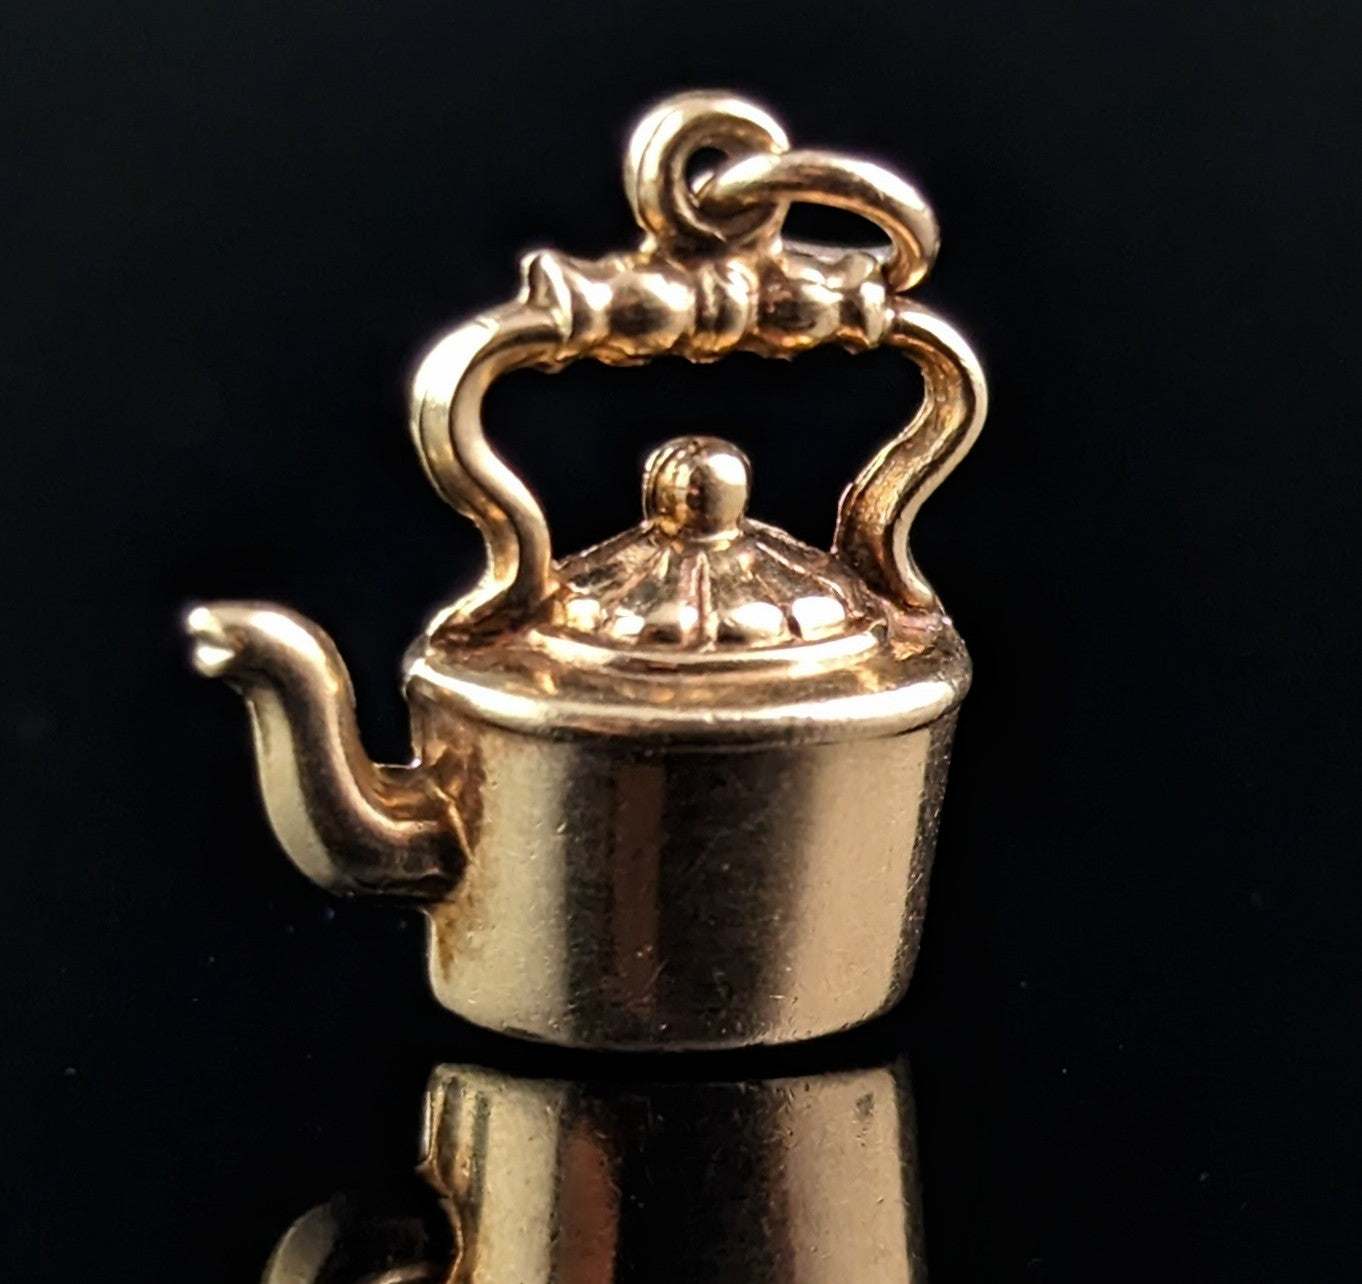 Vintage 9ct gold kettle Charm, old Victorian style kettle